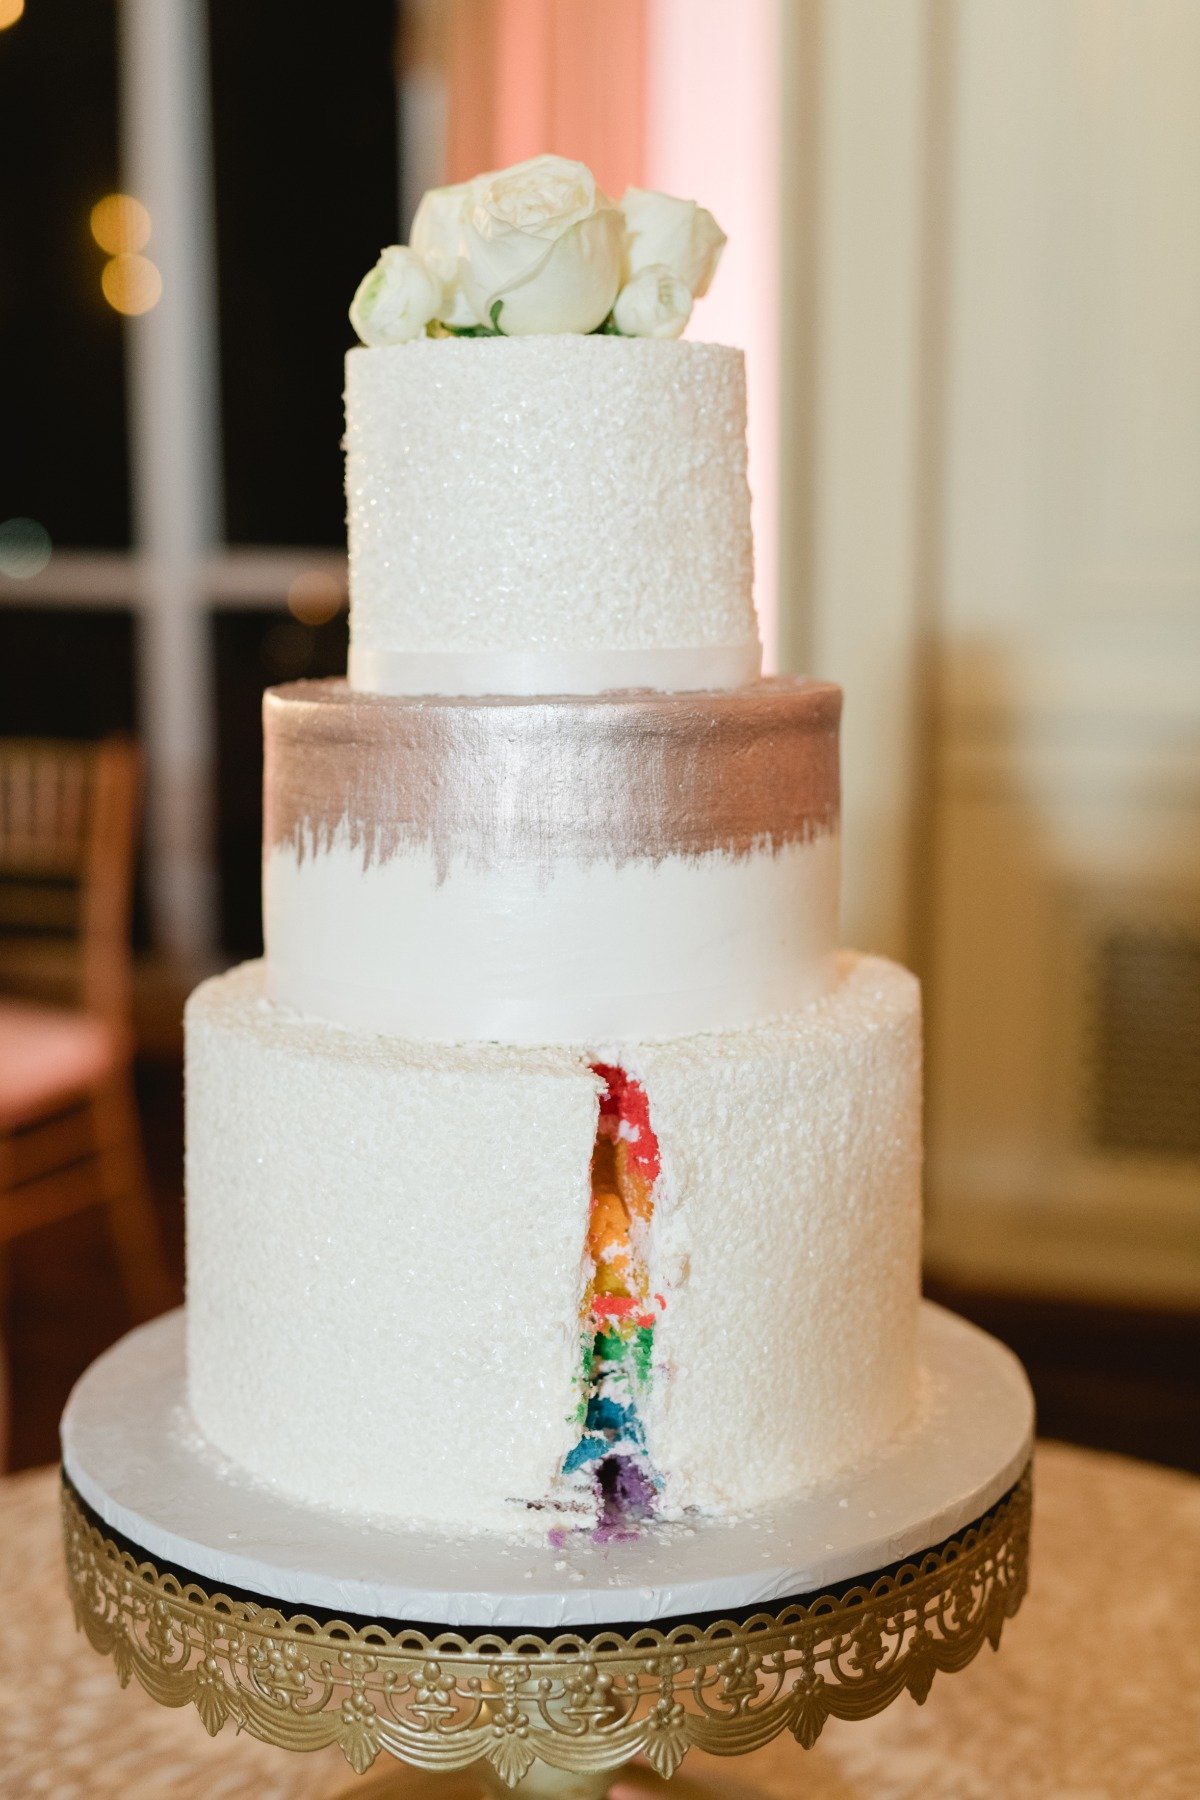 View of inside of cut wedding cake that is rainbow